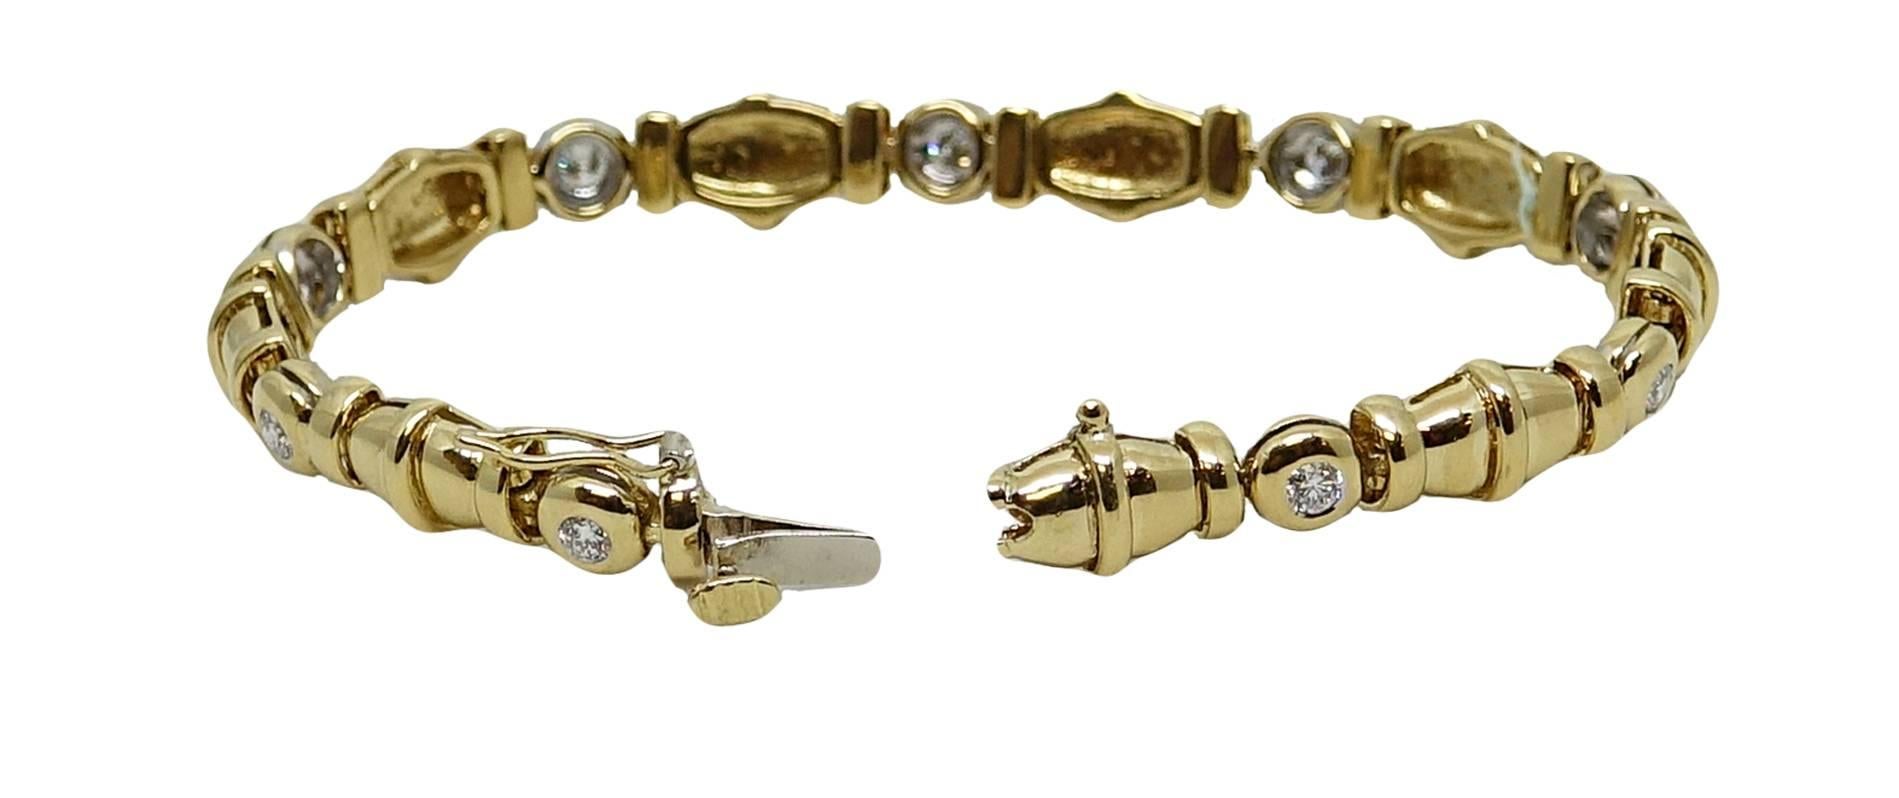 18K Yellow Gold Bracelet With Diamonds Weighing A Total Carat Weight Og .90ct H-I Color VS-SI Clarity. This Bracelet Is 7 Inches In Length.